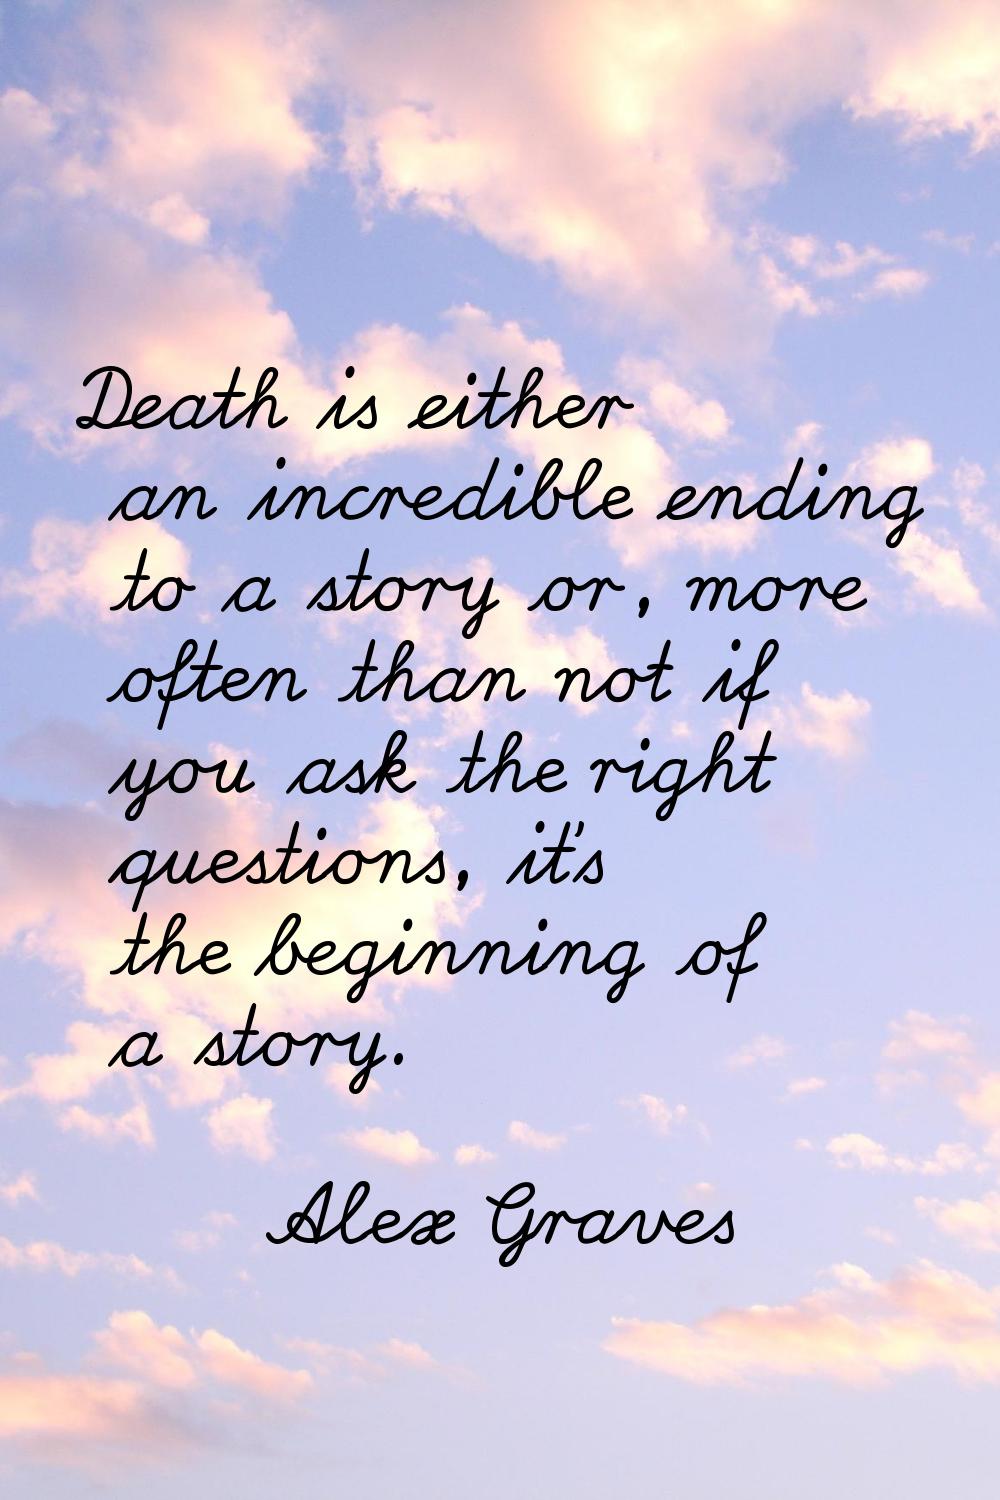 Death is either an incredible ending to a story or, more often than not if you ask the right questi